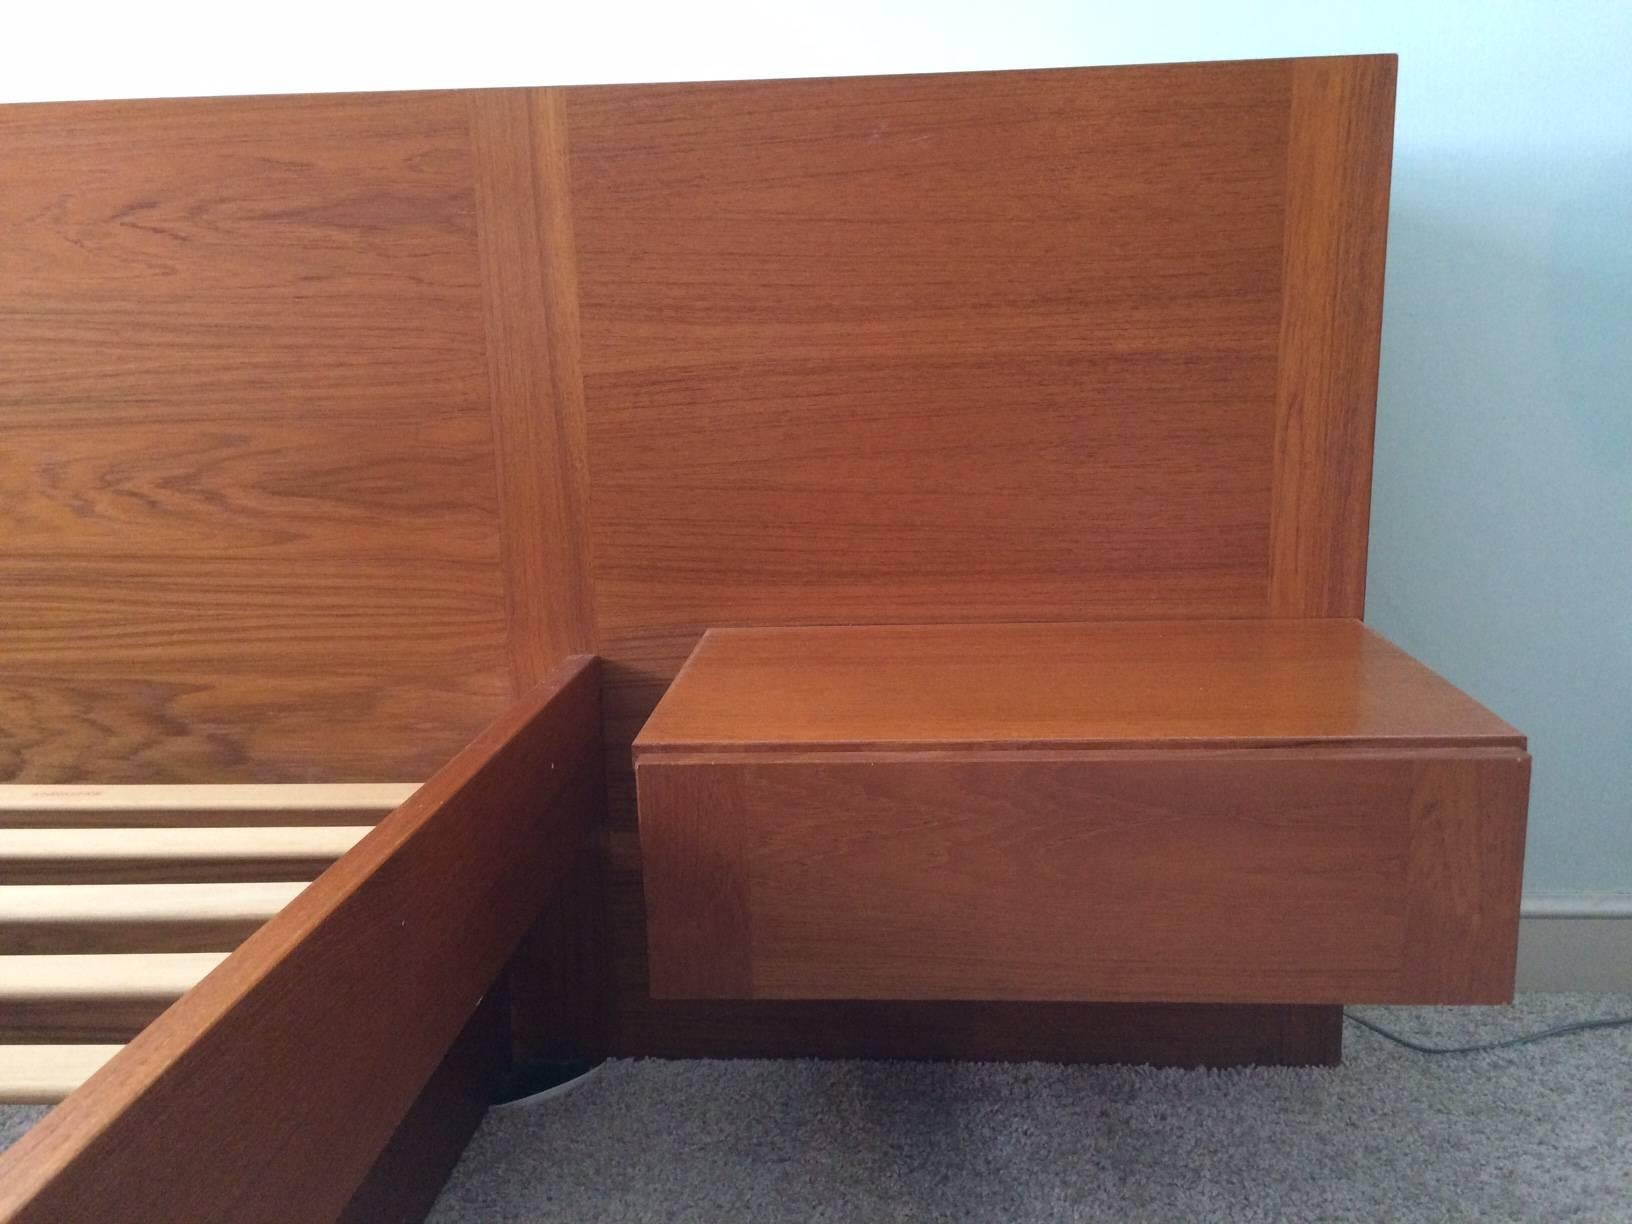 Danish queen-sized teak platform bed with detachable floating nightstands with single drawers. Made in Denmark circa 1972 by Sannemann Møbelfabrik. 

Headboard is 108 inches wide by 29.75 inches high. 

Total depth of the bed is 83